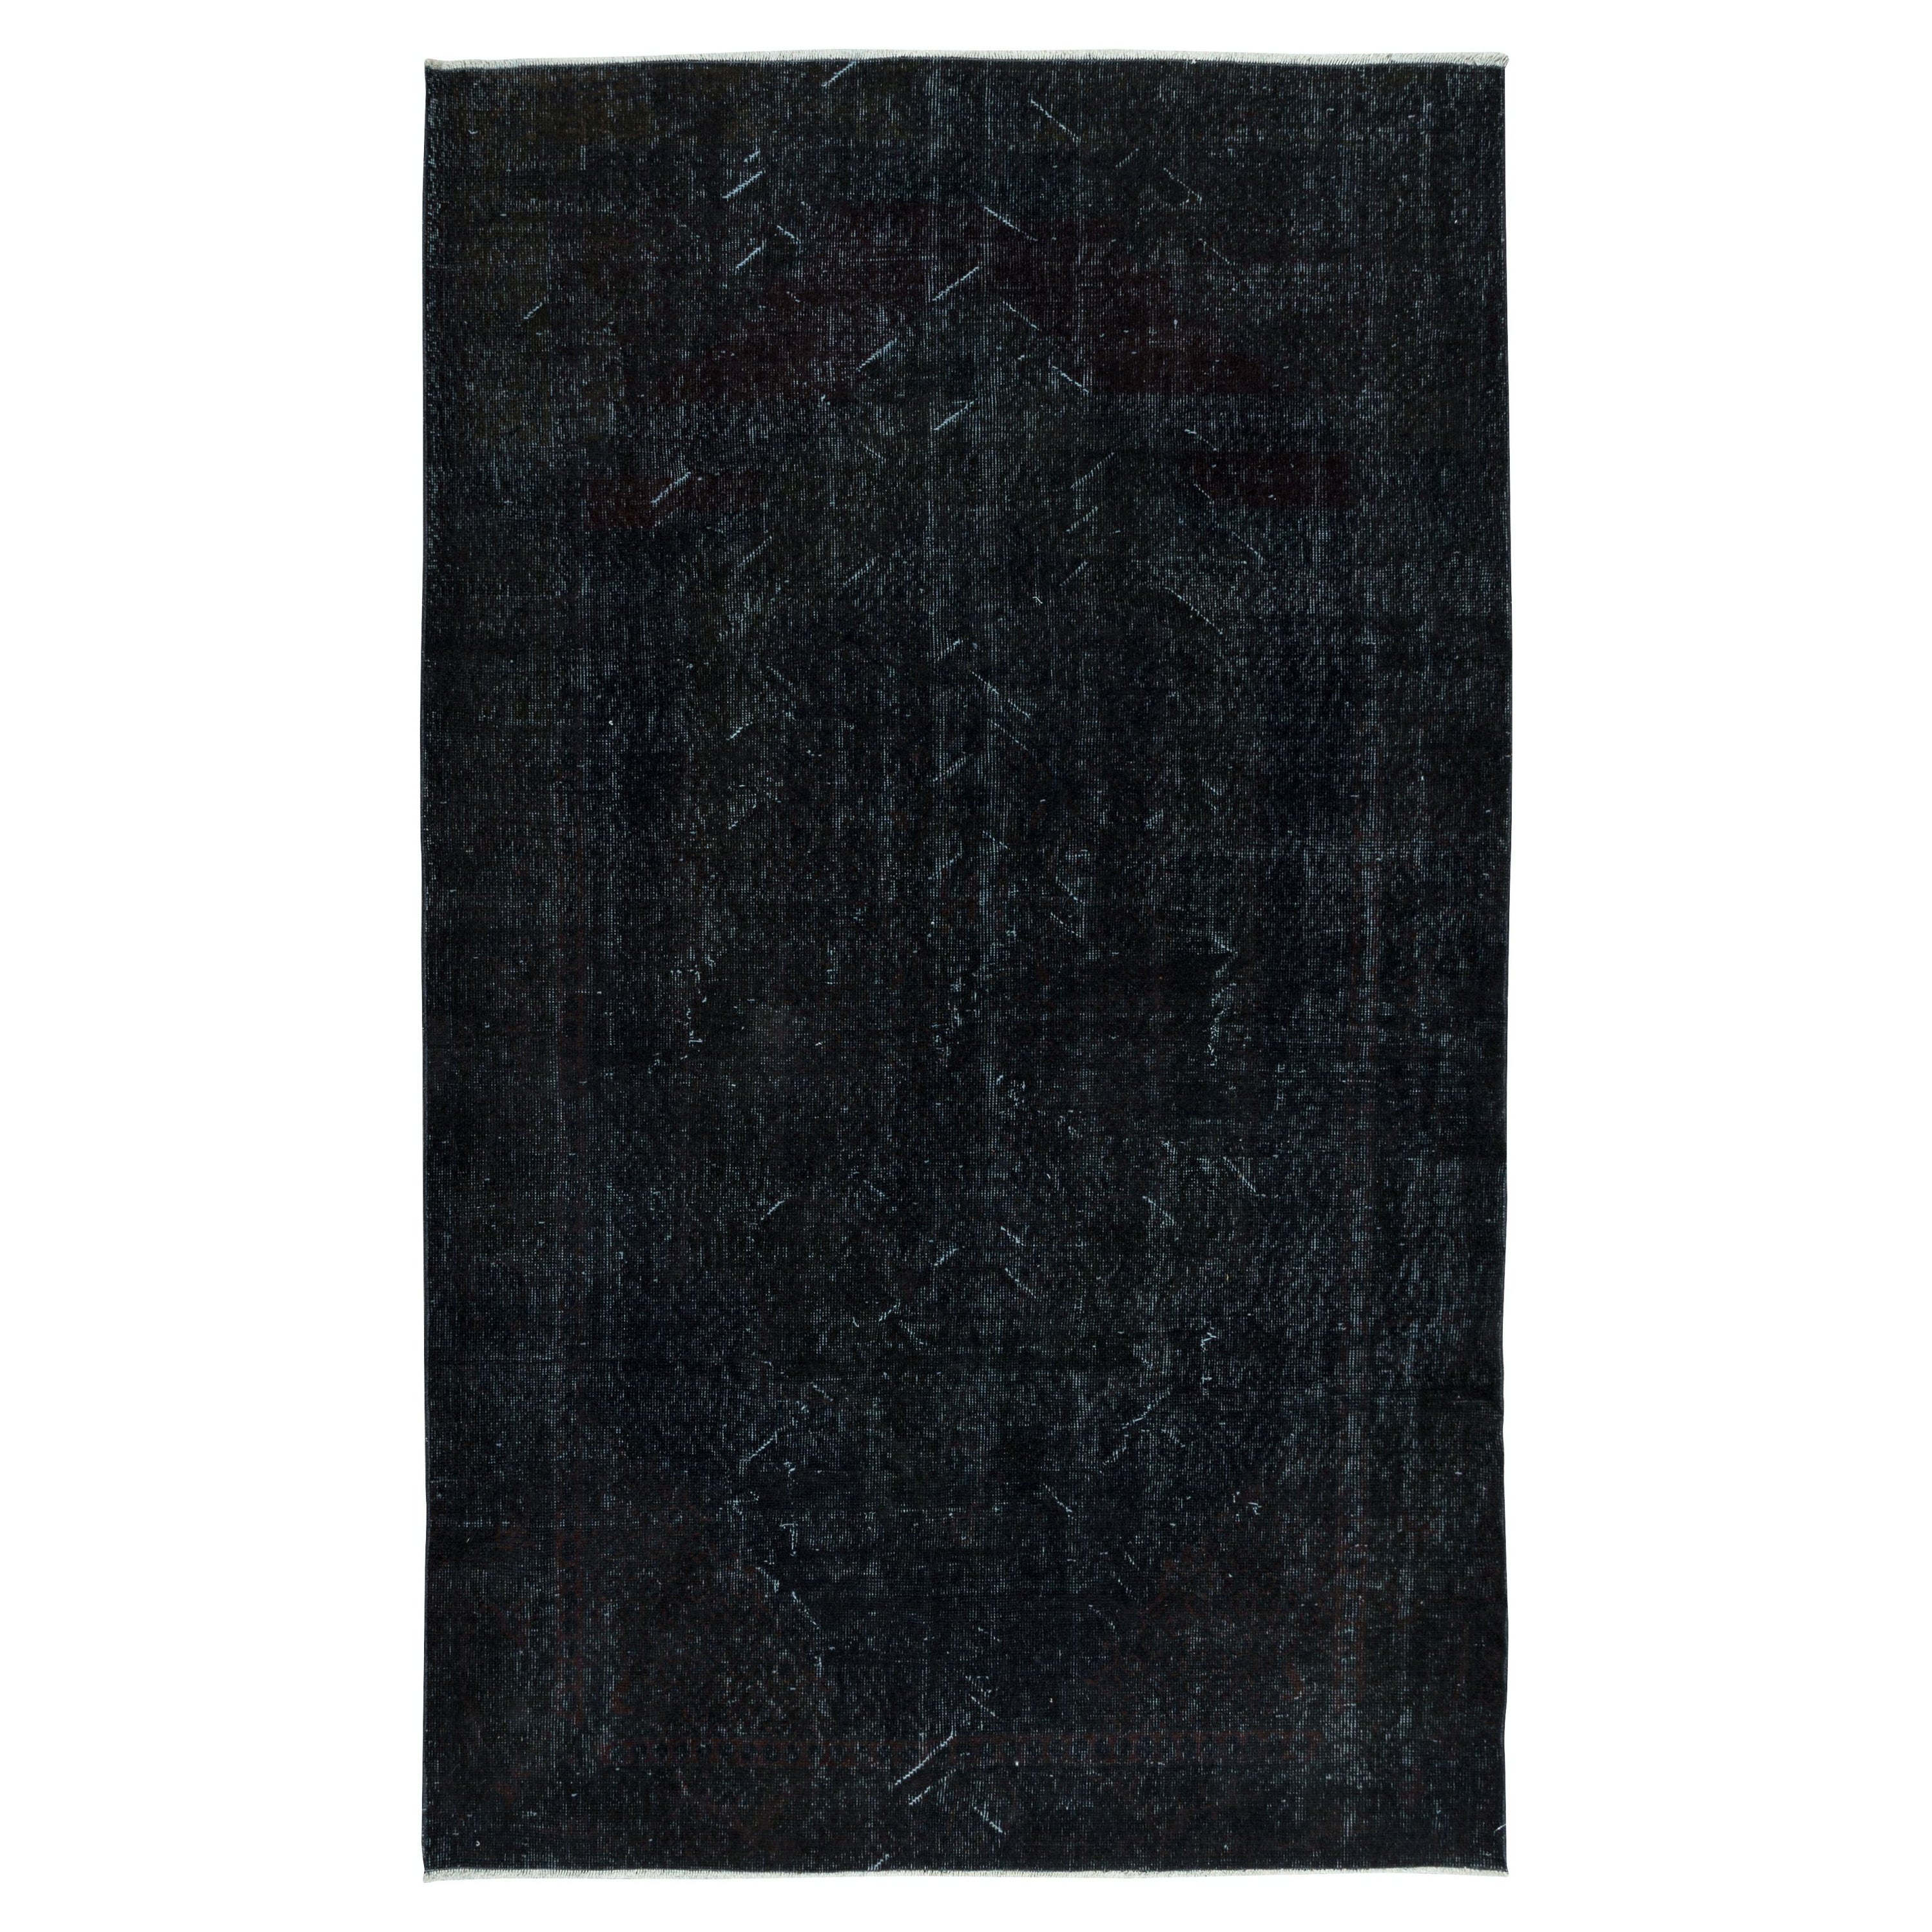 5.6x9 Ft Modern Black Area Rug made of wool and cotton, Hand-Knotted in Turkey For Sale